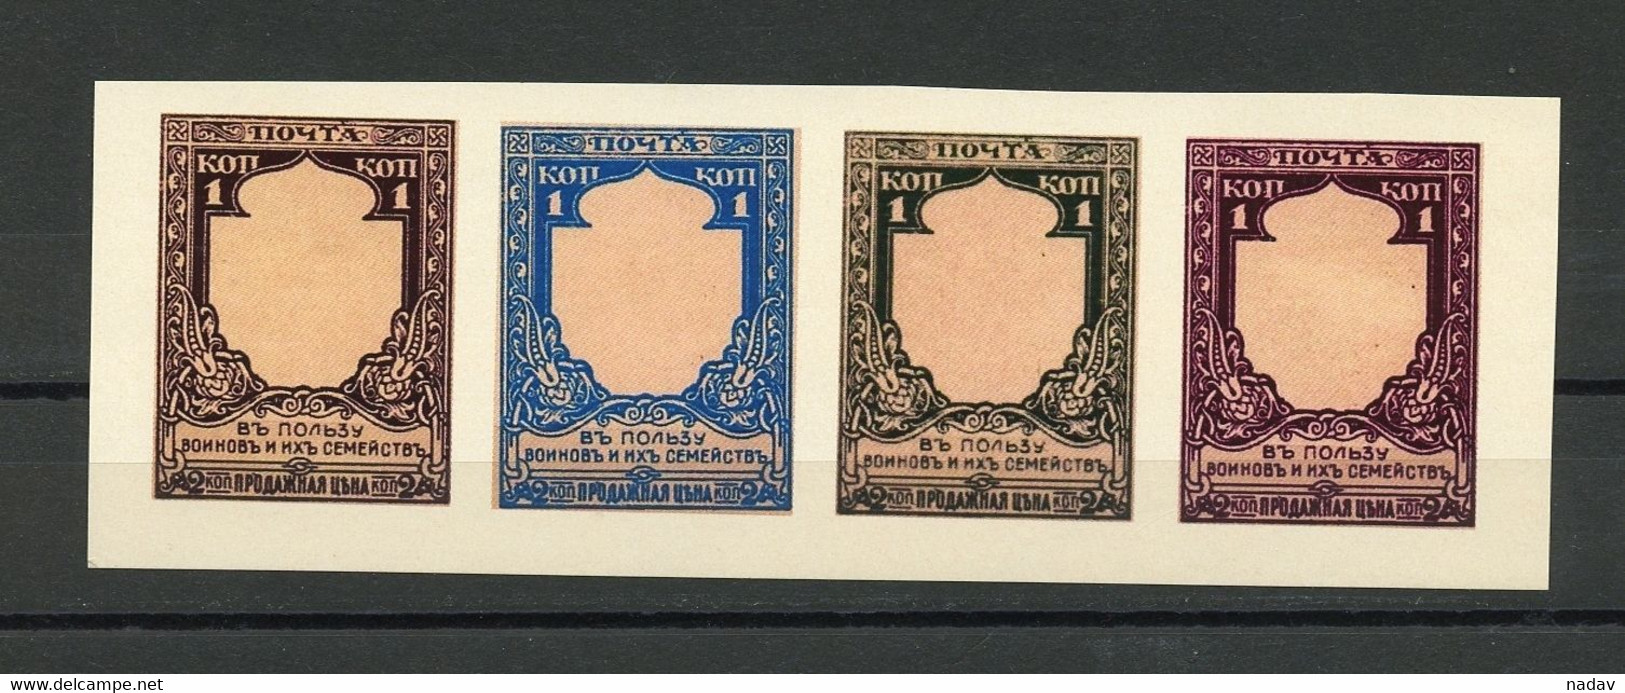 Russia -1912- Proof-1k, Imperforate, Reproduction  - MNH** - Proofs & Reprints